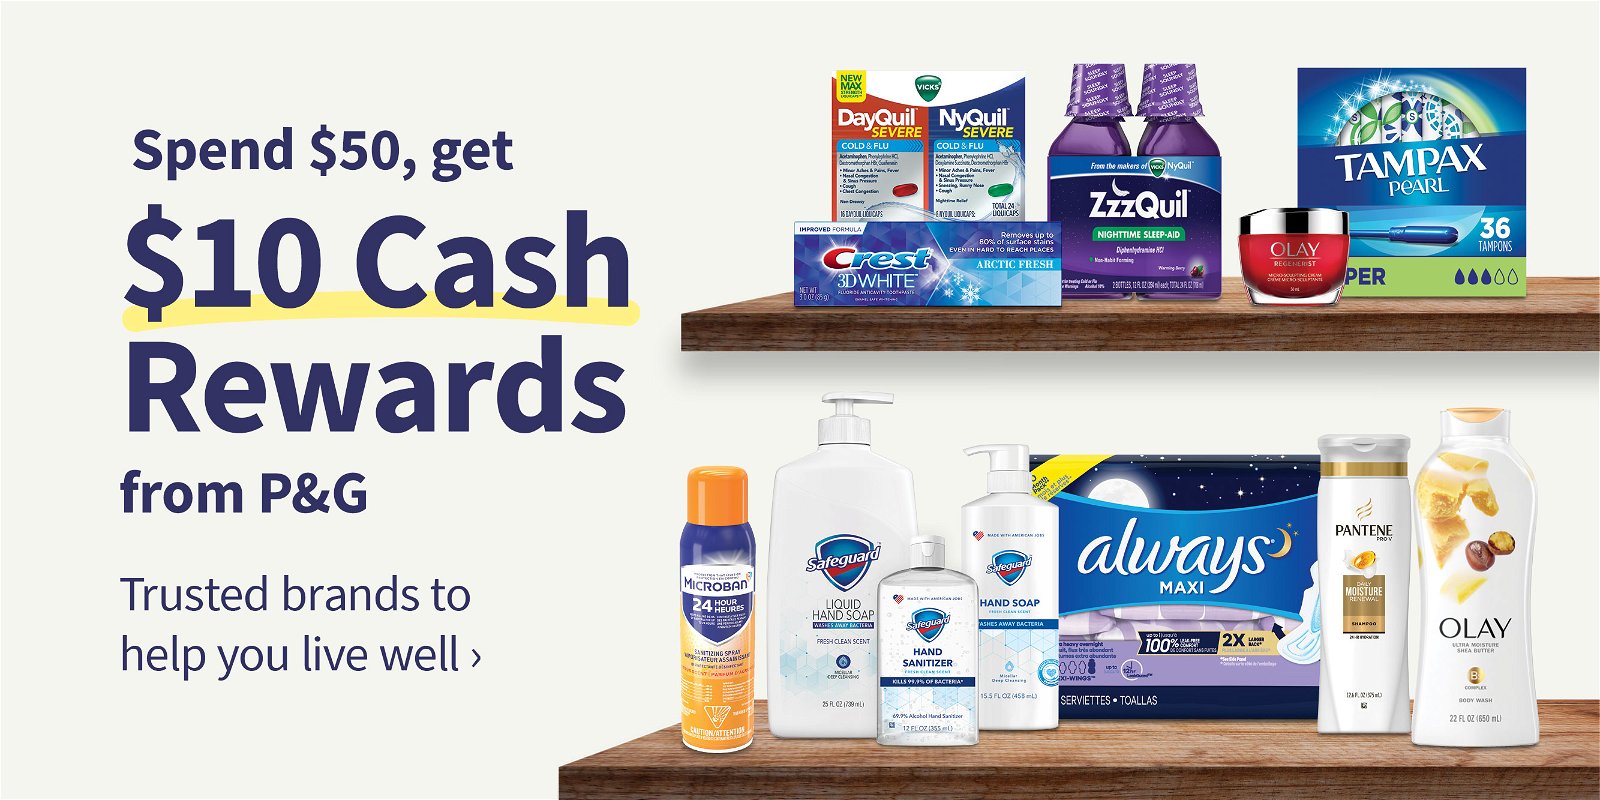 Spend $50, get $10 Cash Rewards from P&G. Trusted brands to help you live well.